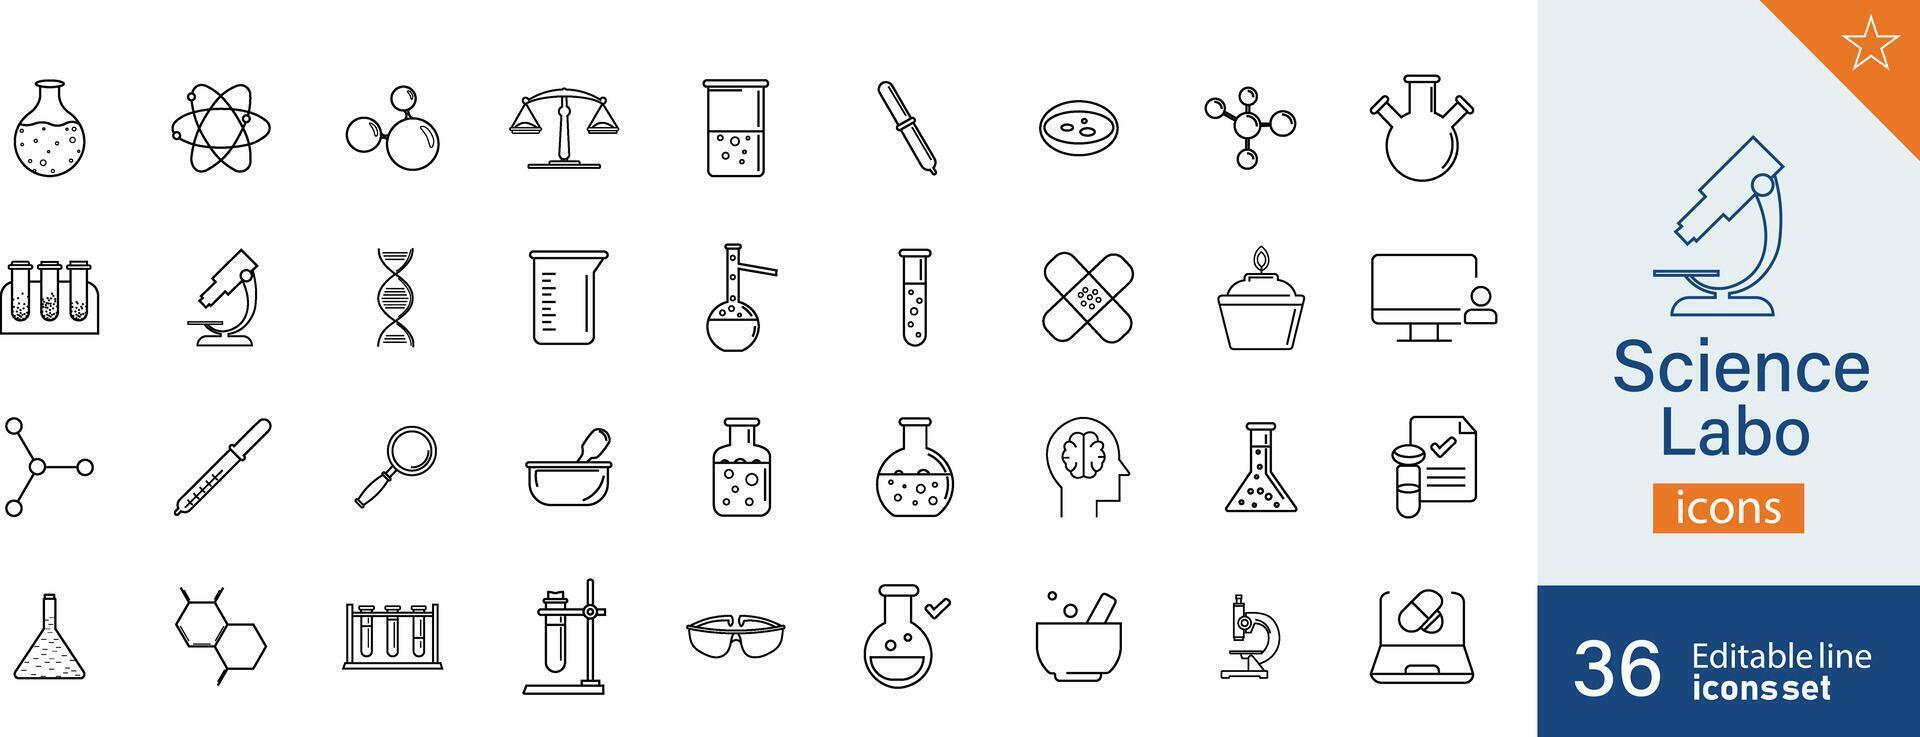 Set of 32 Science Labo web icons in line style. cyberspace, data collection, design. Vector illustration.